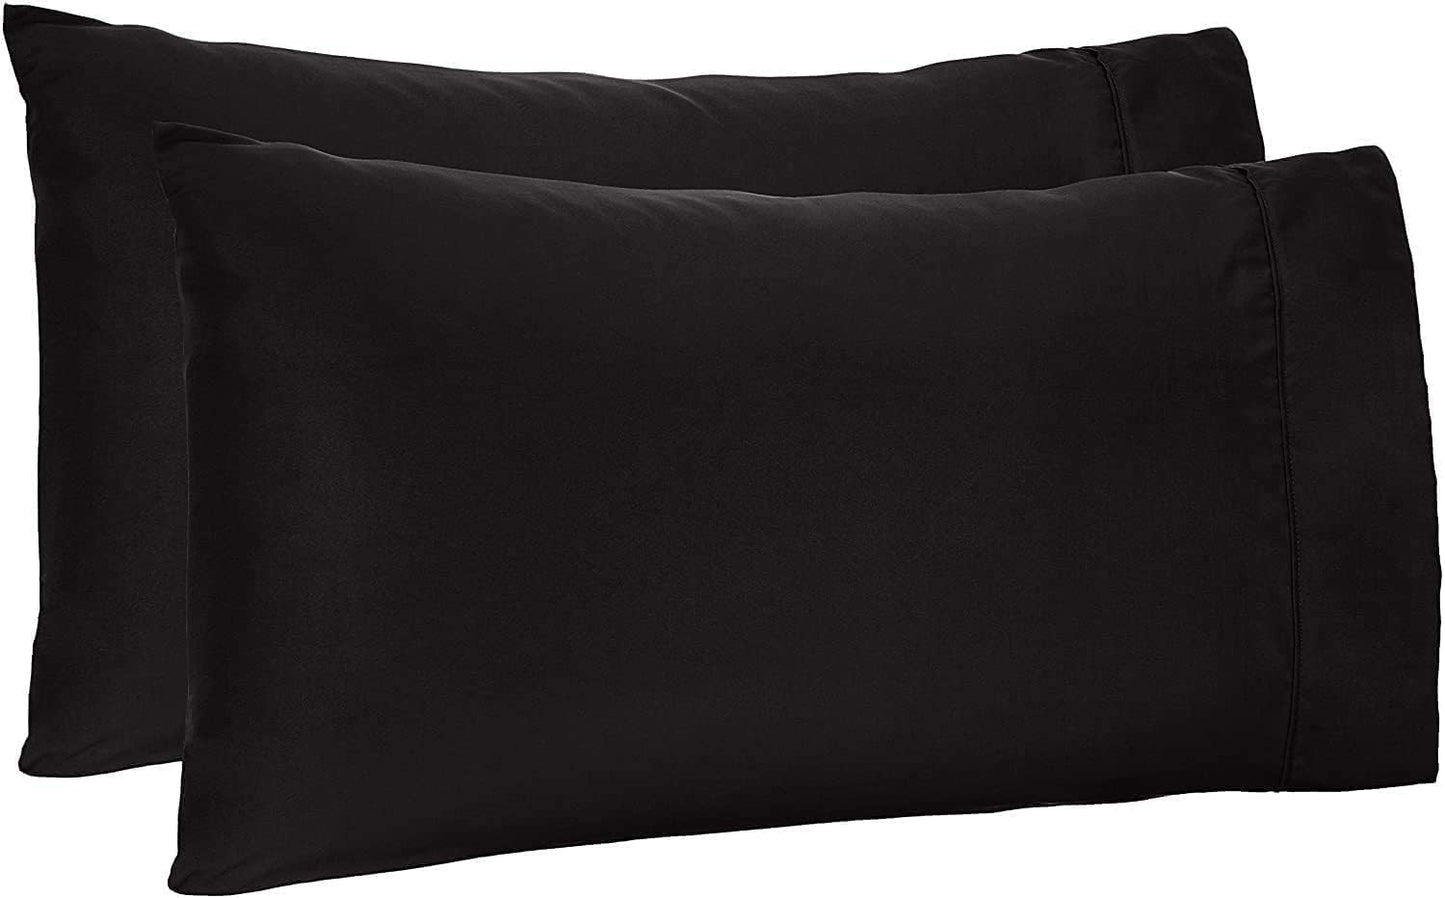 Calking Black Pillow Covers Egyptian Cotton 1000 Thread Counts